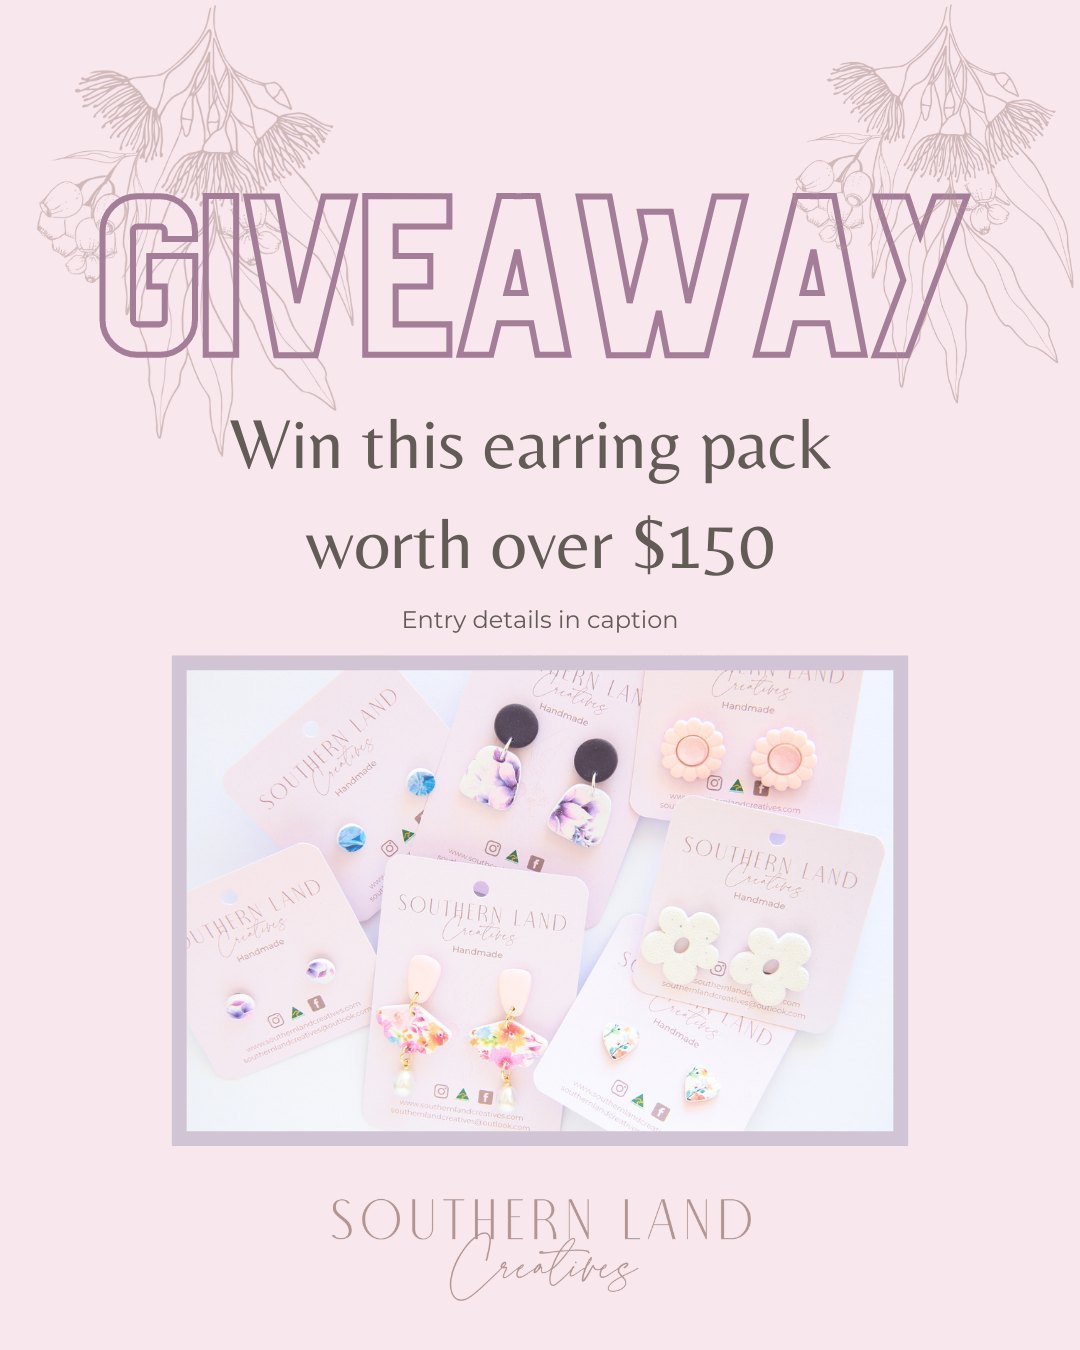 Time for your chance to win!

There have been a few business milestones that I have missed because I have been so busy! 
I'd love to give one lucky follower the chance to win the earrings pictured!

Winnings includes free postage to one nominated pos